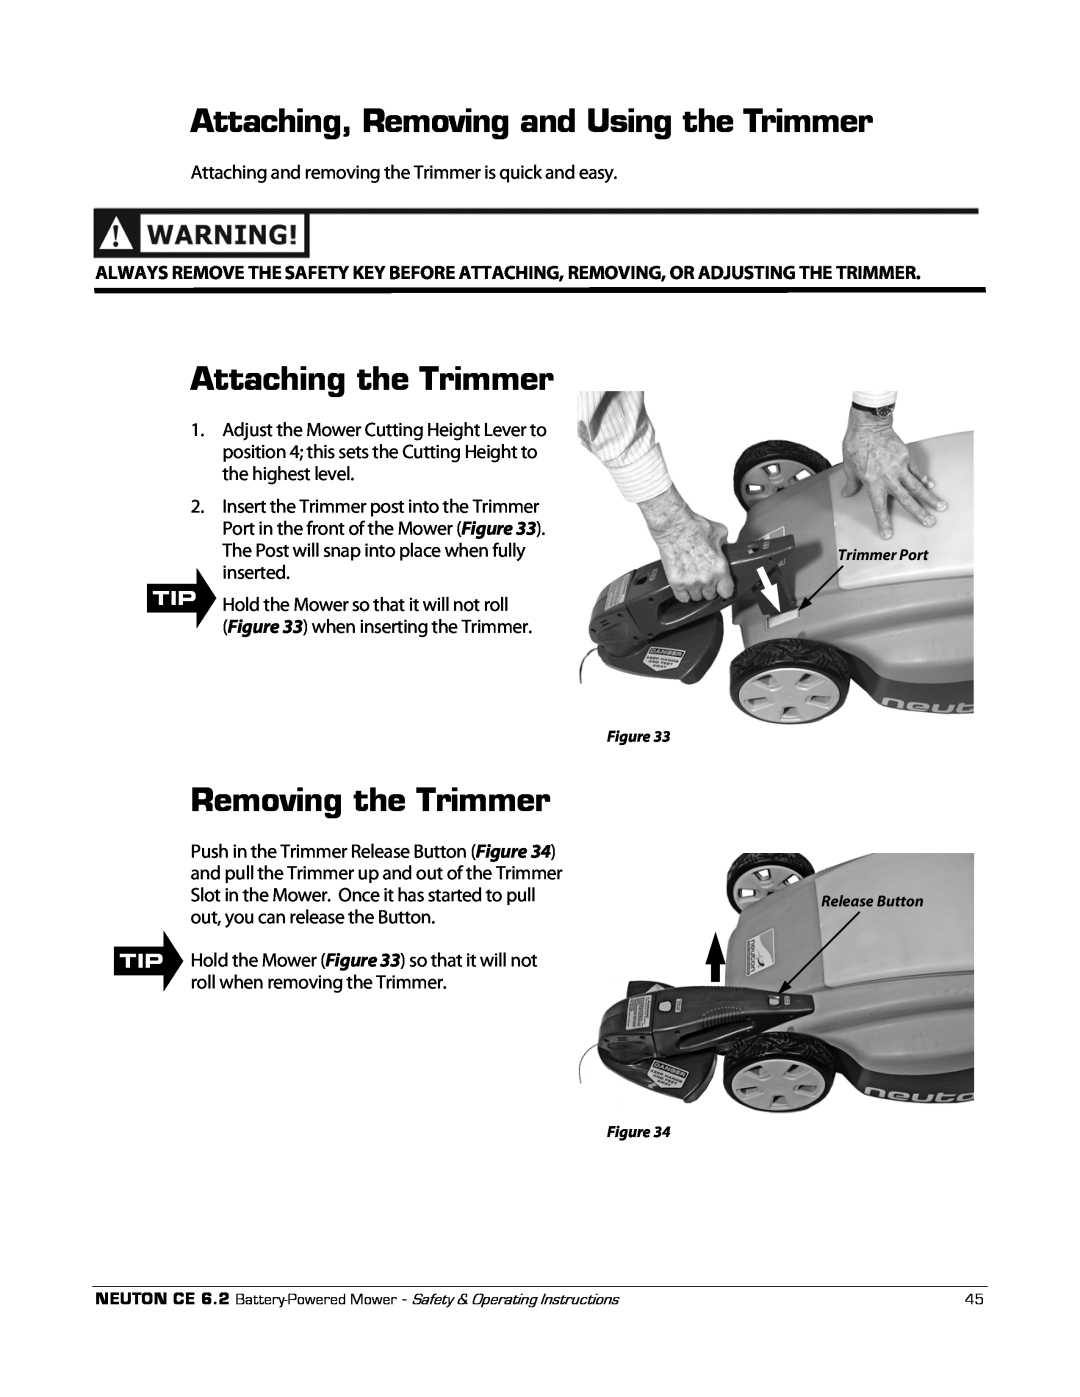 Neuton CE 6.2 manual Attaching, Removing and Using the Trimmer, Attaching the Trimmer, Removing the Trimmer 